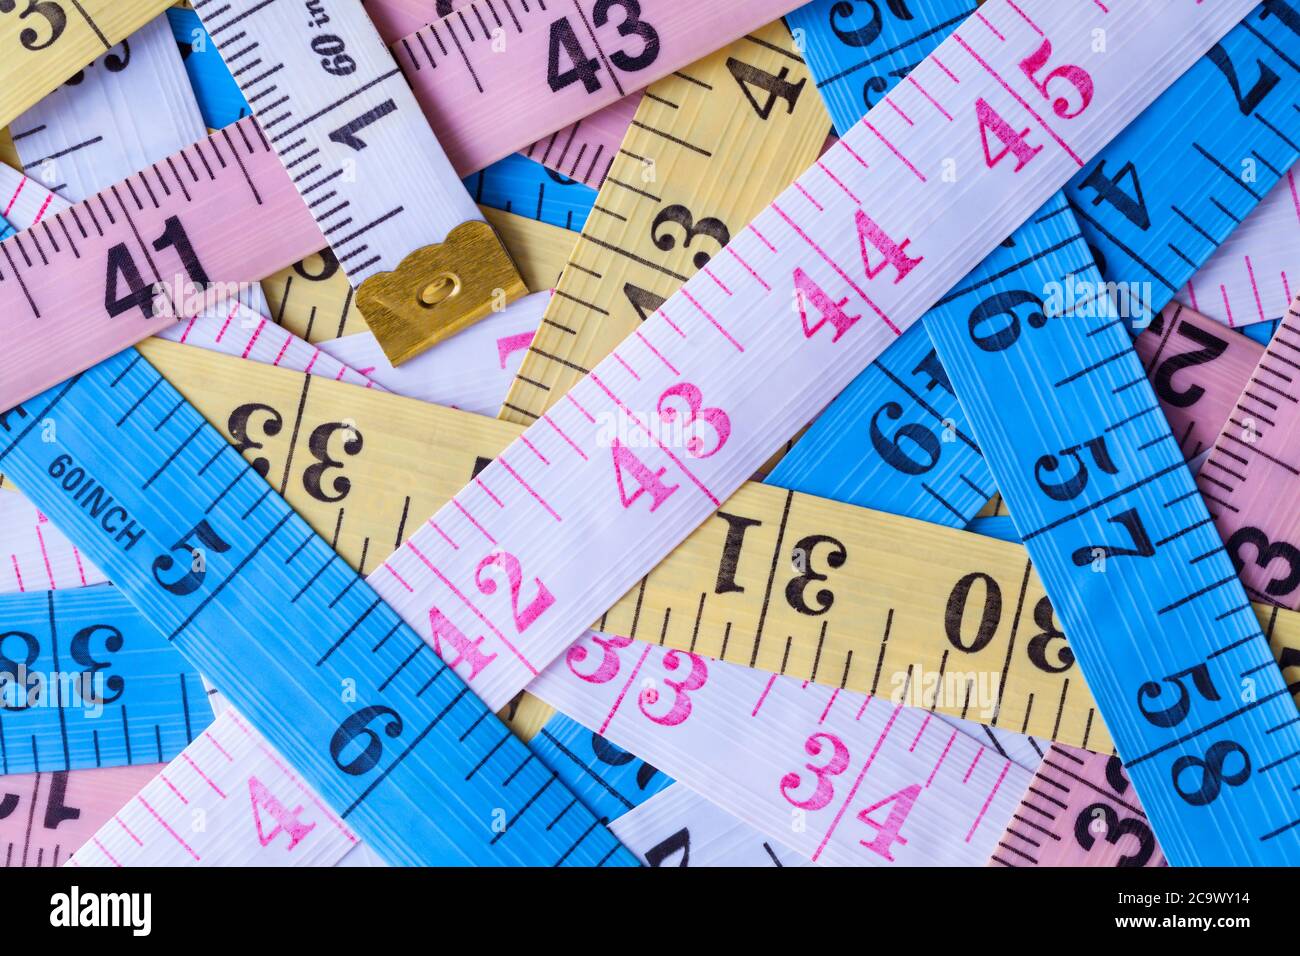 https://c8.alamy.com/comp/2C9WY14/sewing-measuring-tape-criss-cross-background-close-up-2C9WY14.jpg